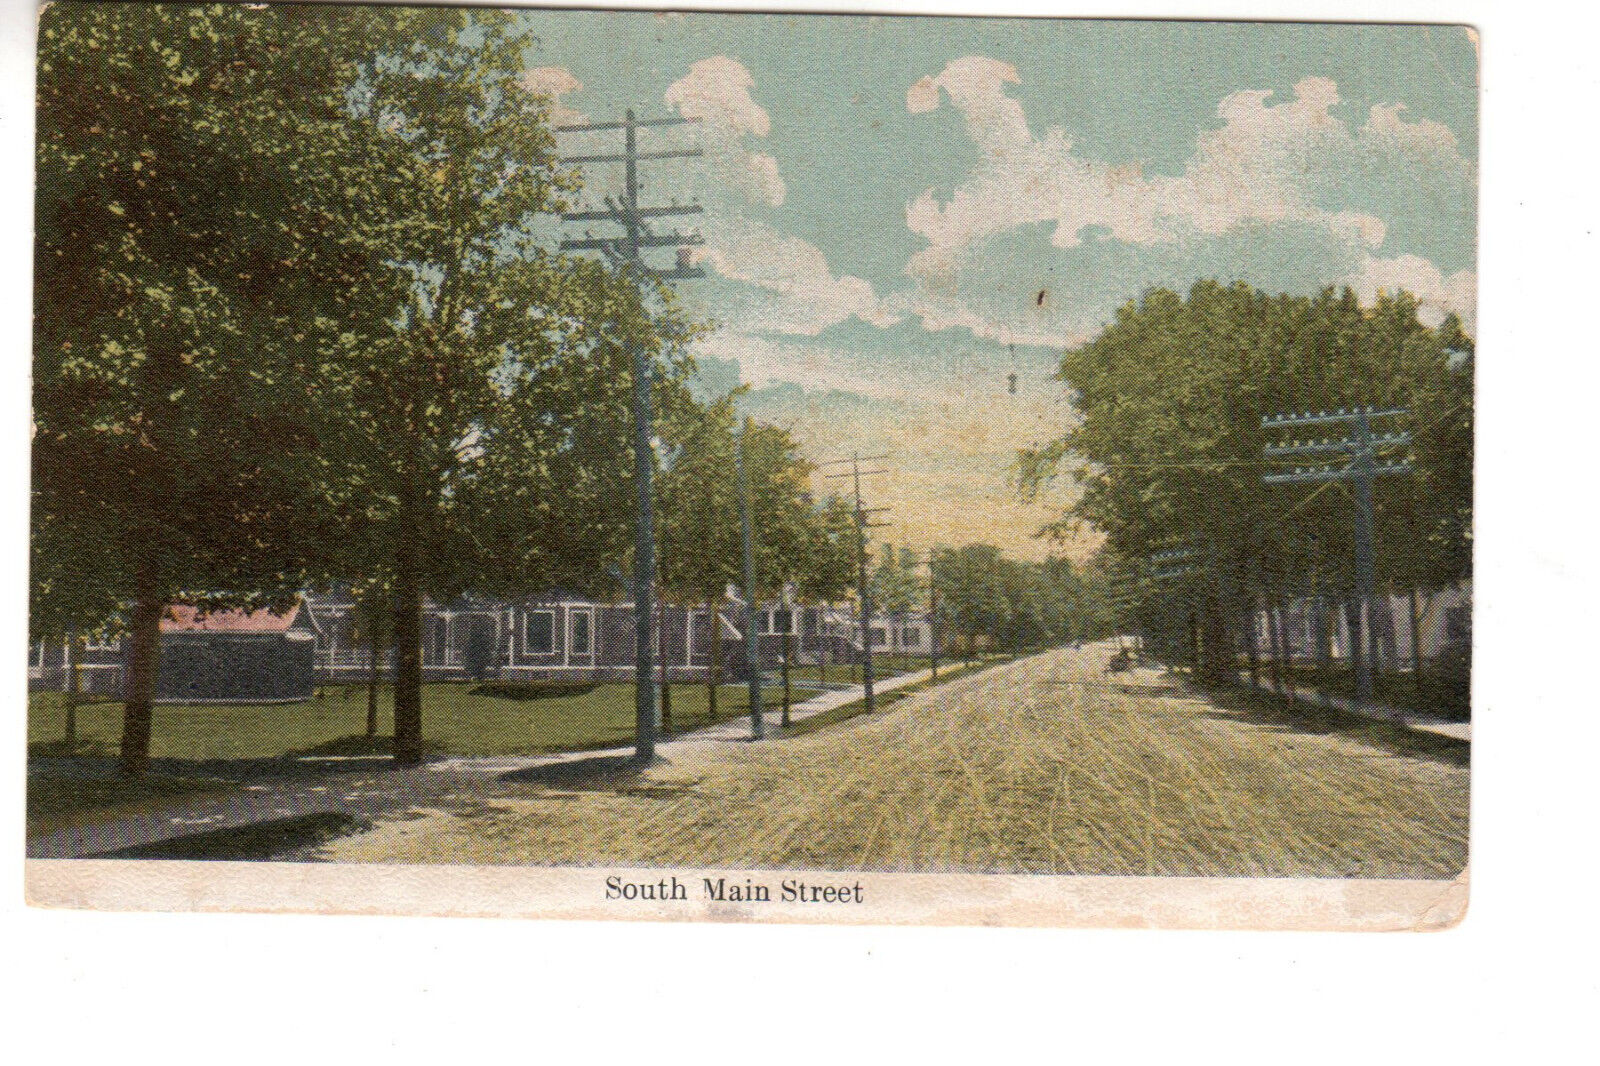 Postcard: South Main Street, PIttsfield, ME (Maine) - H H Nutter /Rexall